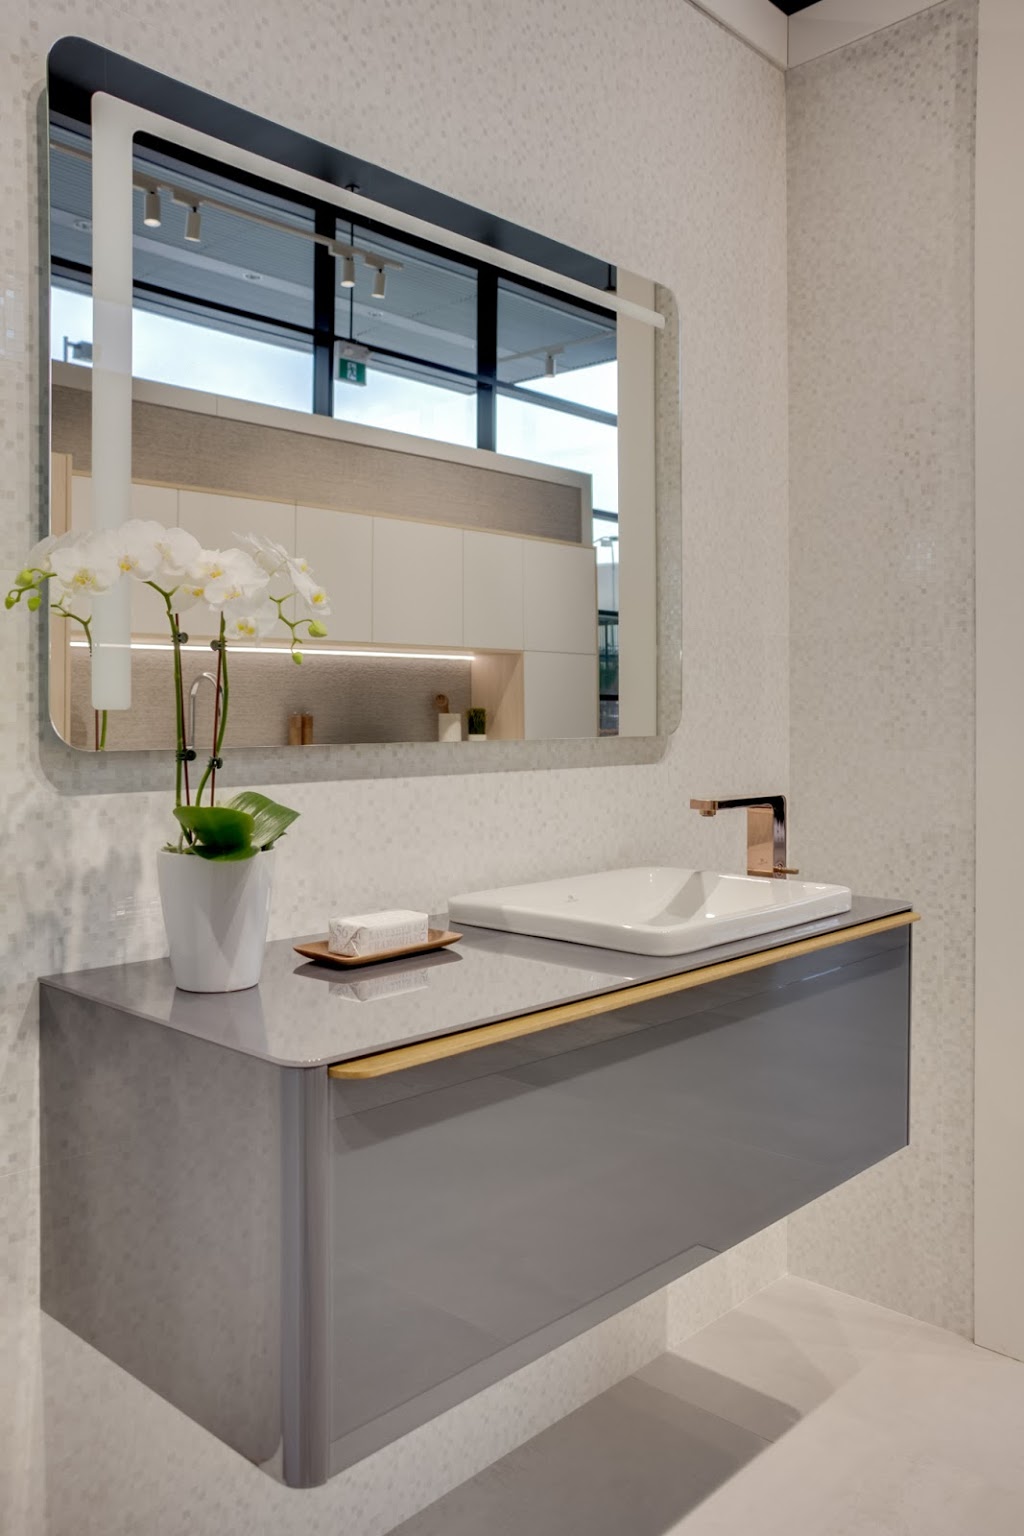 Porcelanosa -Tiles, Kitchen and Bathroom | home goods store | 735 Caledonia Rd, York, ON M6B 4B3, Canada | 4167825394 OR +1 416-782-5394